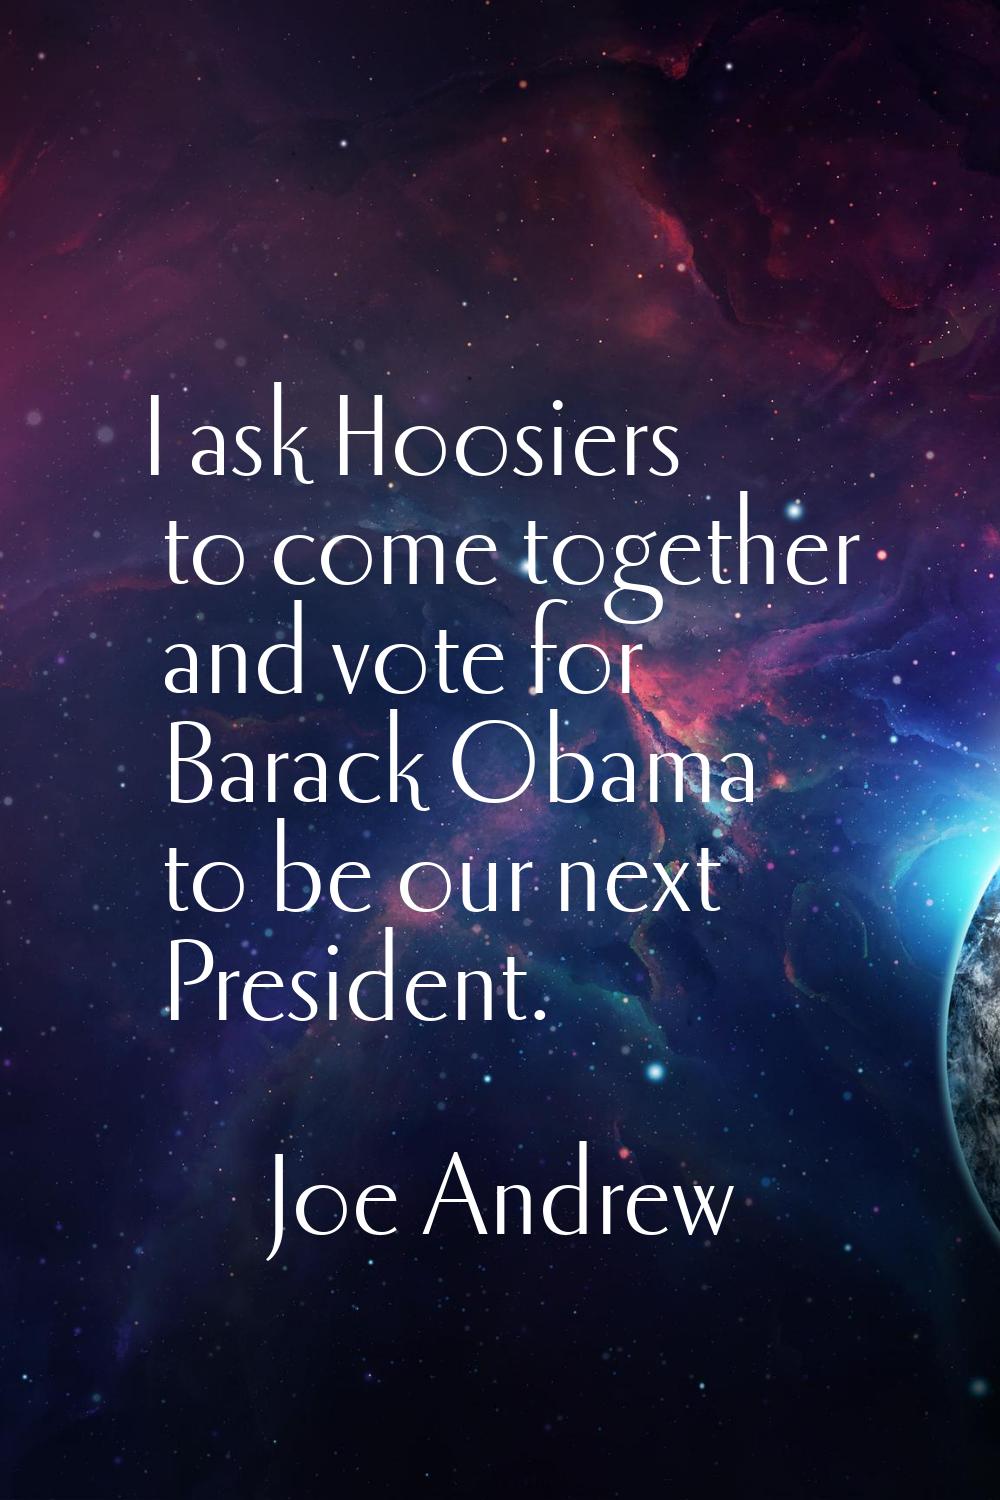 I ask Hoosiers to come together and vote for Barack Obama to be our next President.